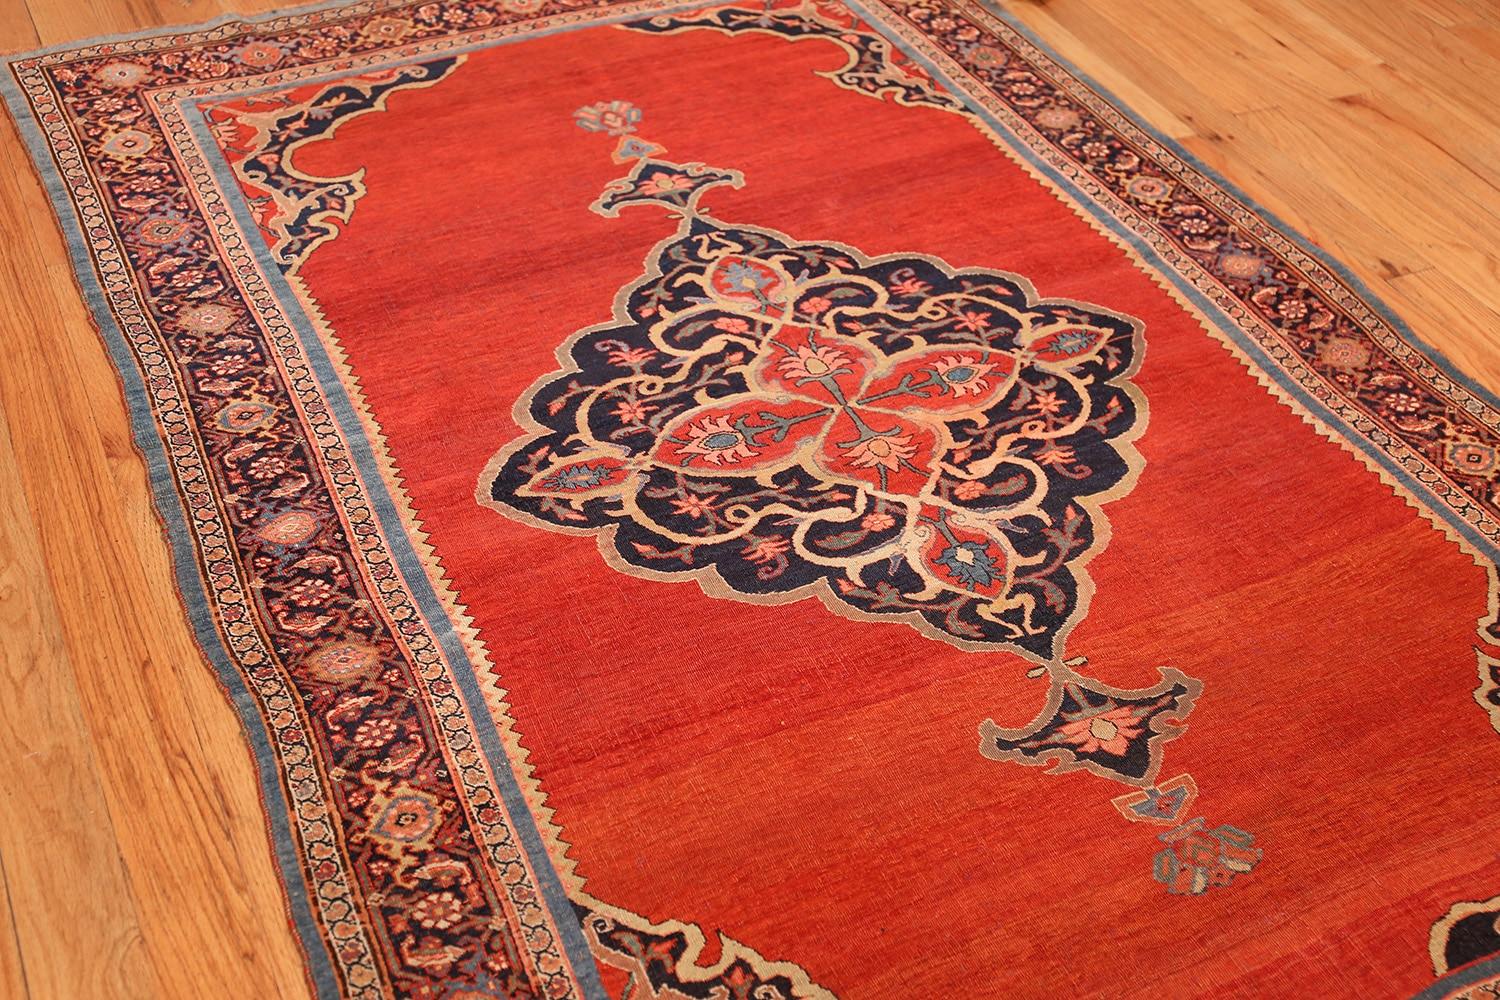 Fine antique Persian Halvai Bidjar rug, country of origin: Persia, date circa 1880. Size: 4 ft. 8 in x 7 ft. (1.42 m x 2.13 m)

A fascinating antique Persian carpet with a commanding presence, this unique and alluring antique Halvai Bidjar rug is an